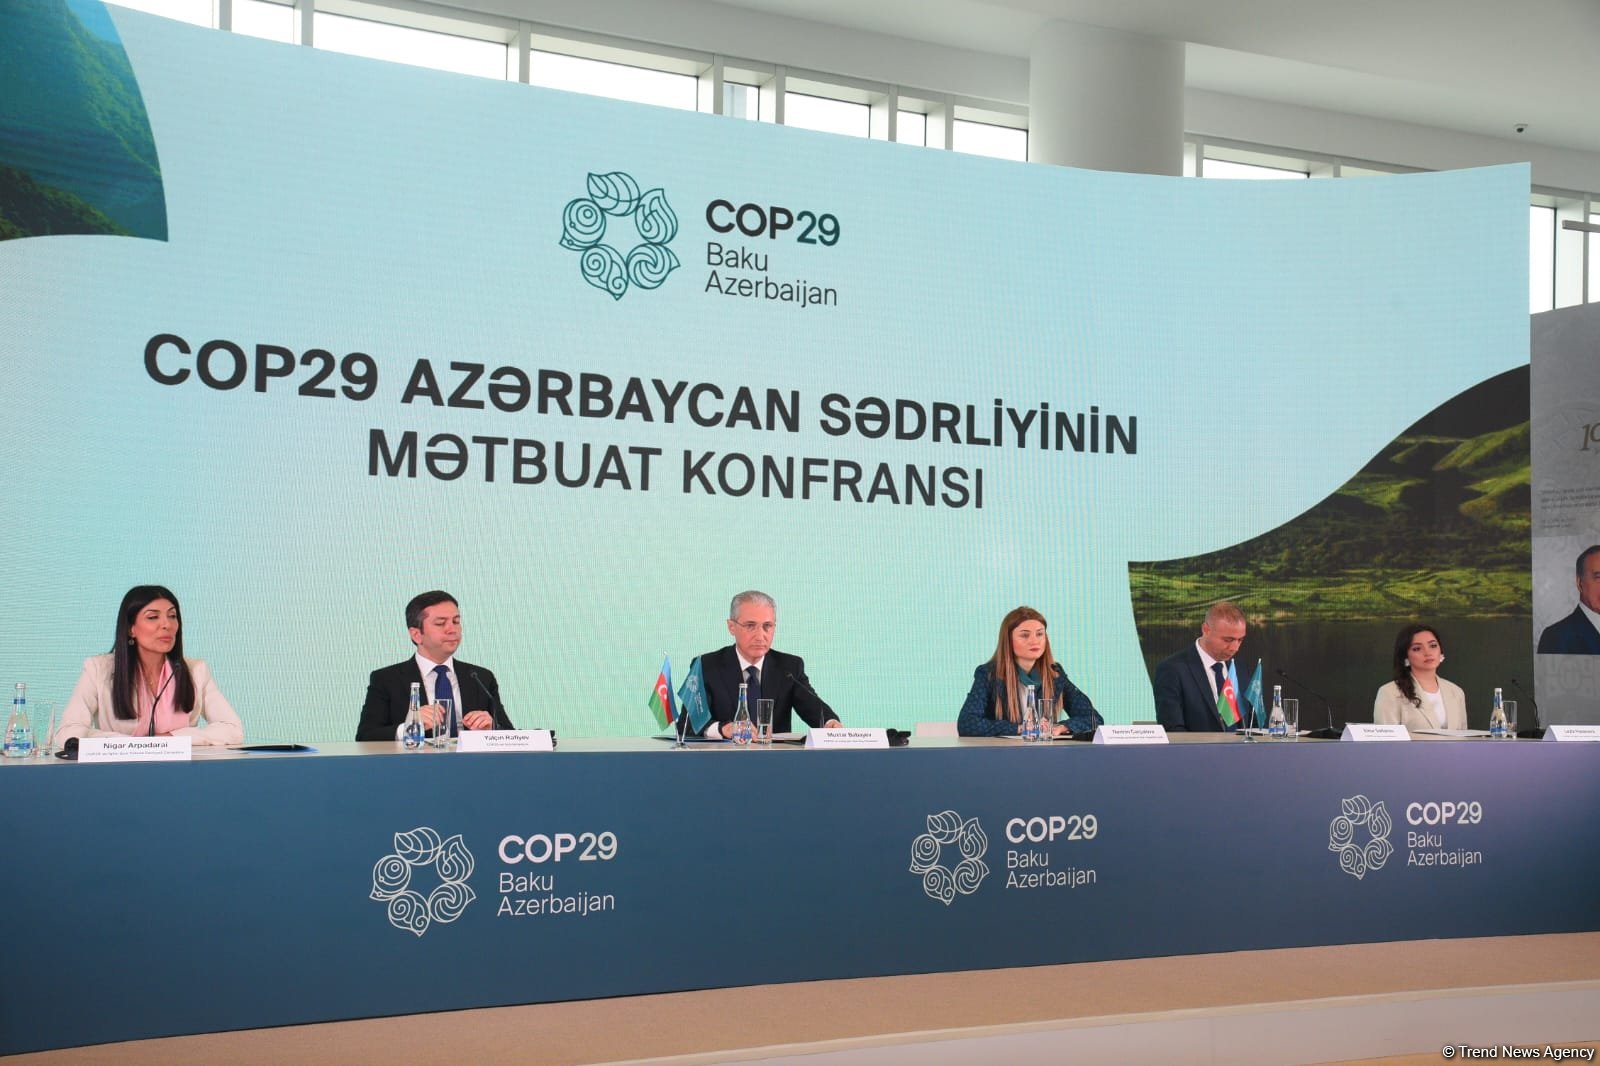 COP29 website to launch this week - Azerbaijani official